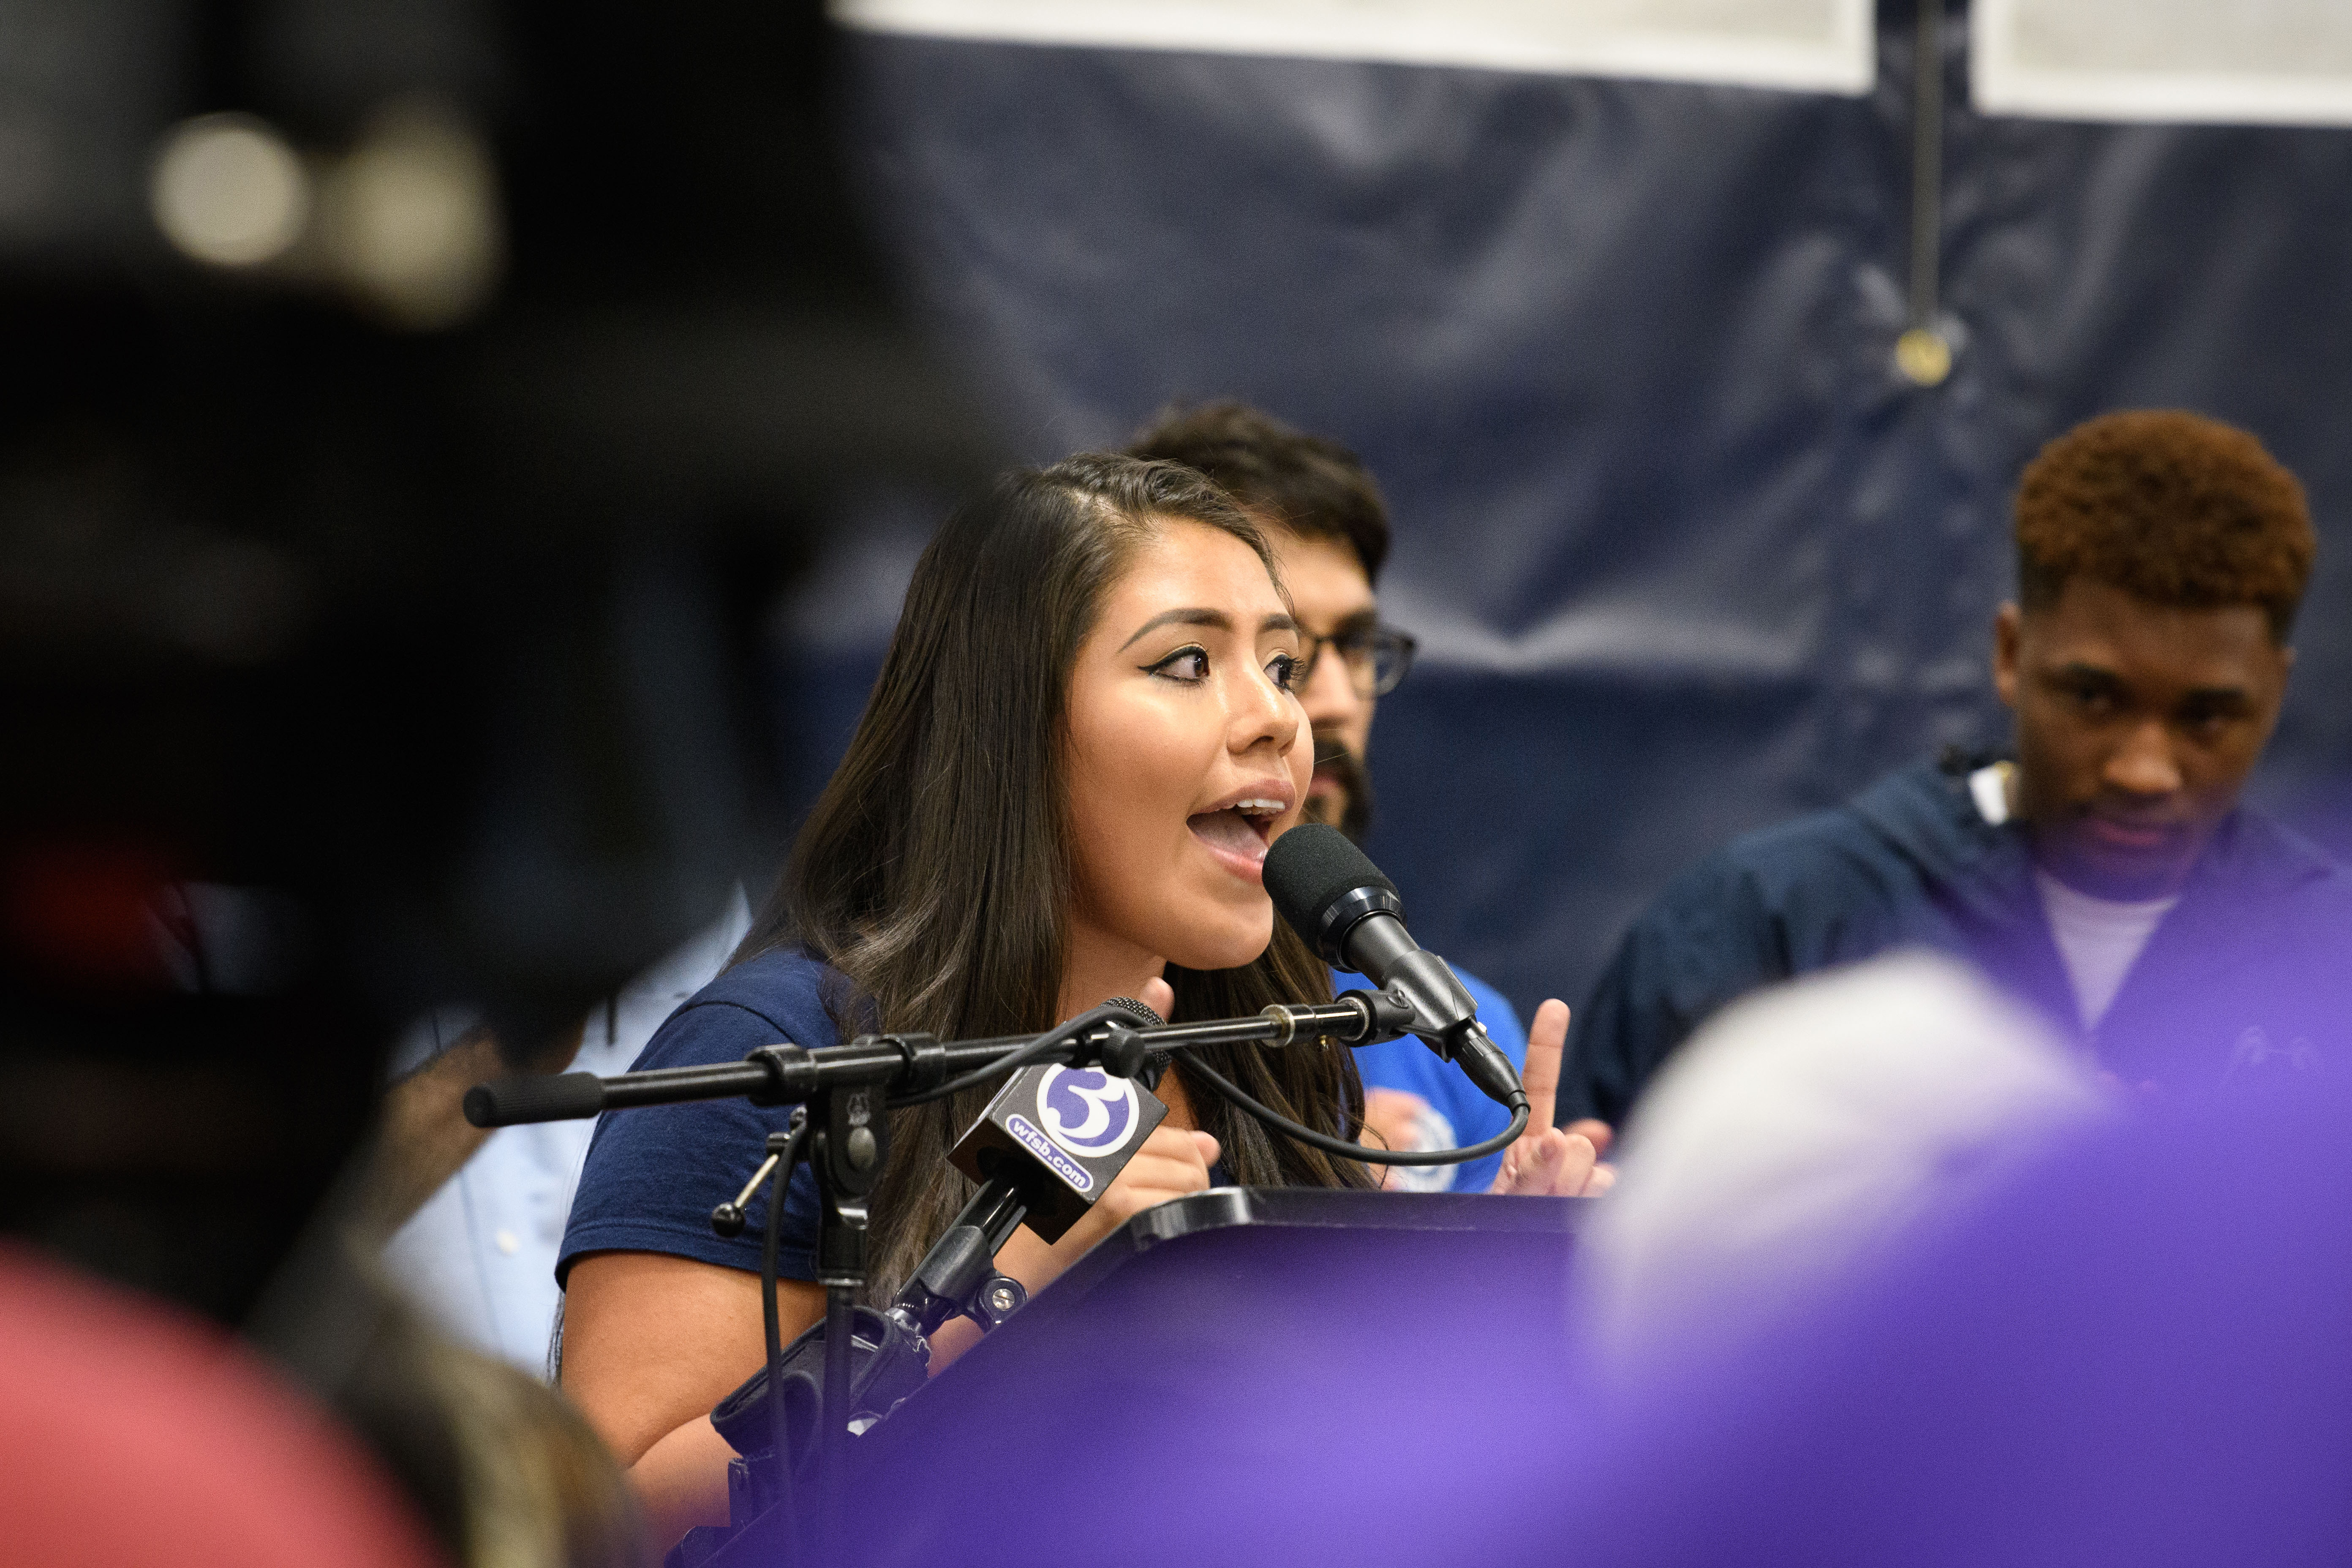 Undergraduate Student Government President Irma Valverde '18 (BUS)(CLAS) speaks during a rally at the Hugh S. Greer Field House on Sept. 20, 2017. (Peter Morenus/UConn Photo)